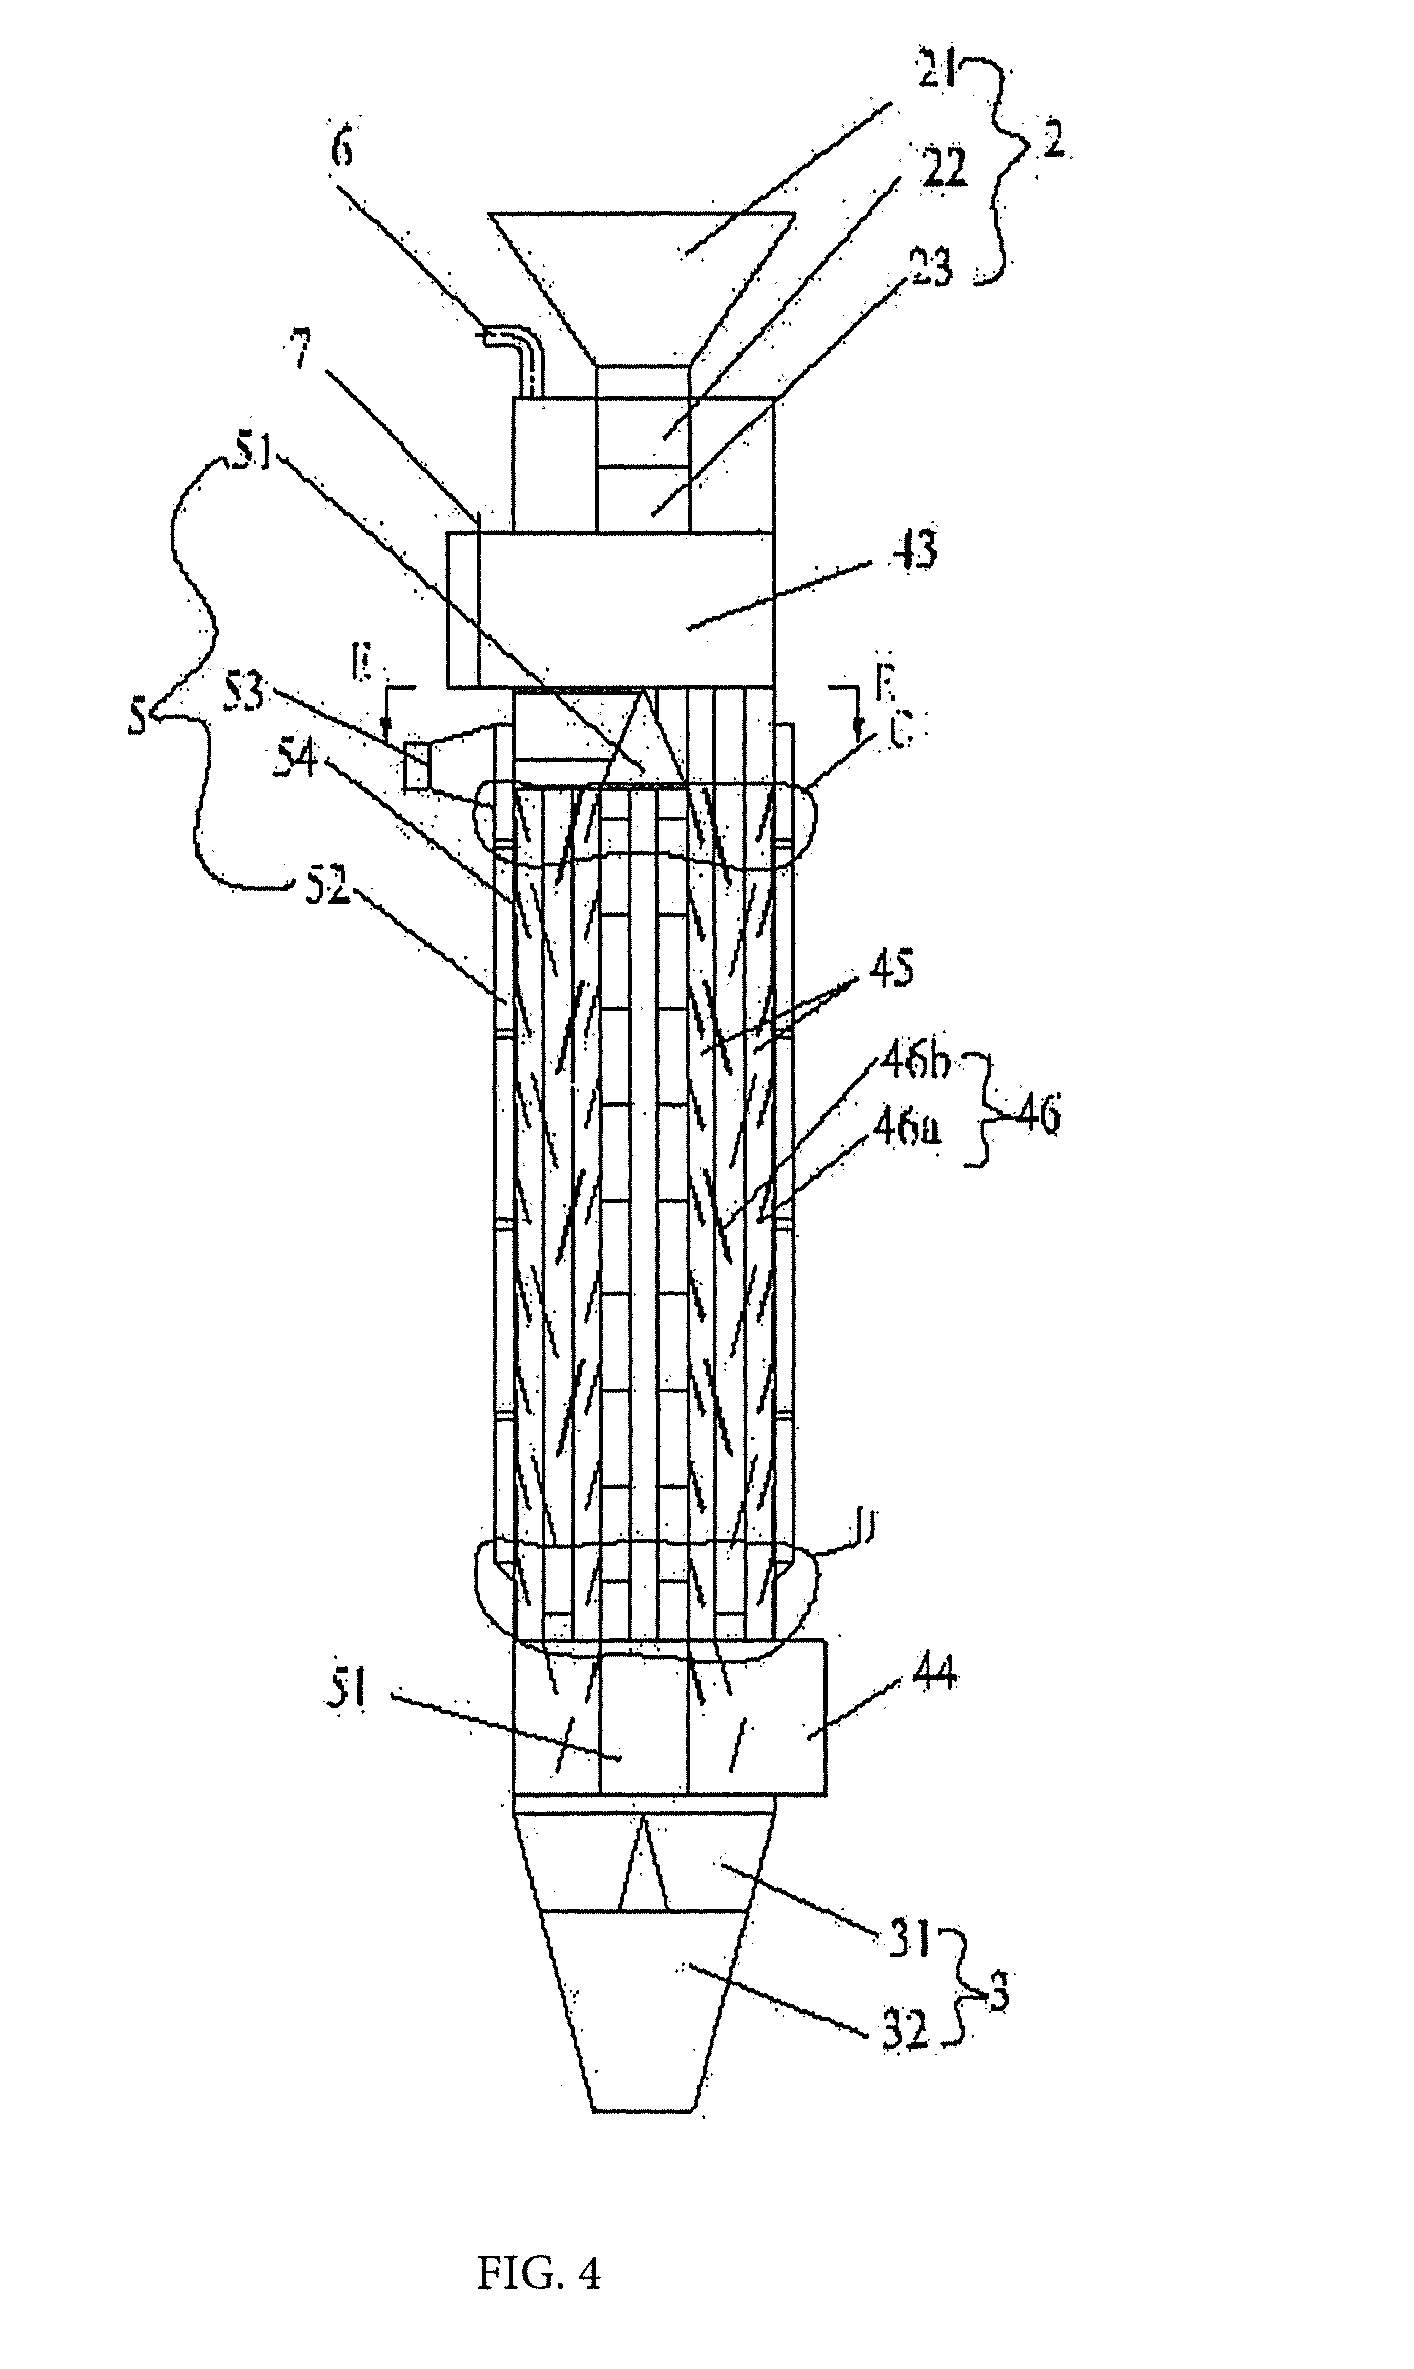 Apparatus and system for manufacturing quality coal products